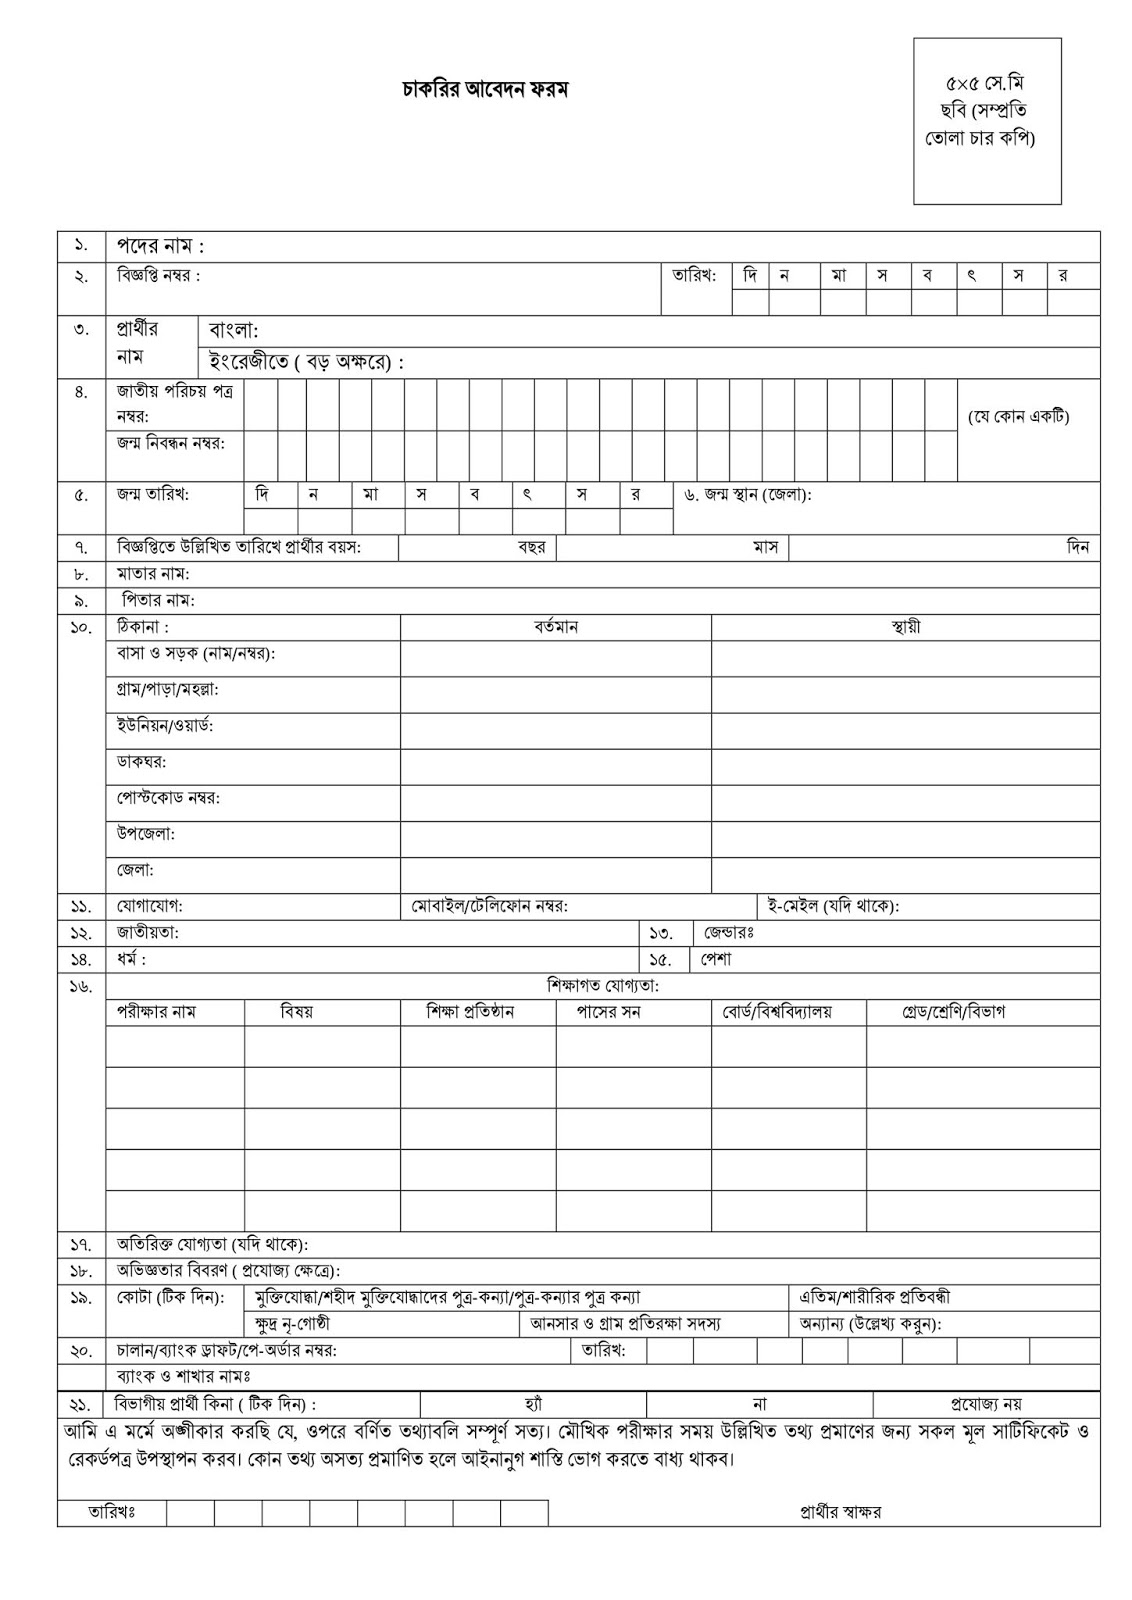 Department of Inspection for Factories and Establishments (DIFE) Job Application Form